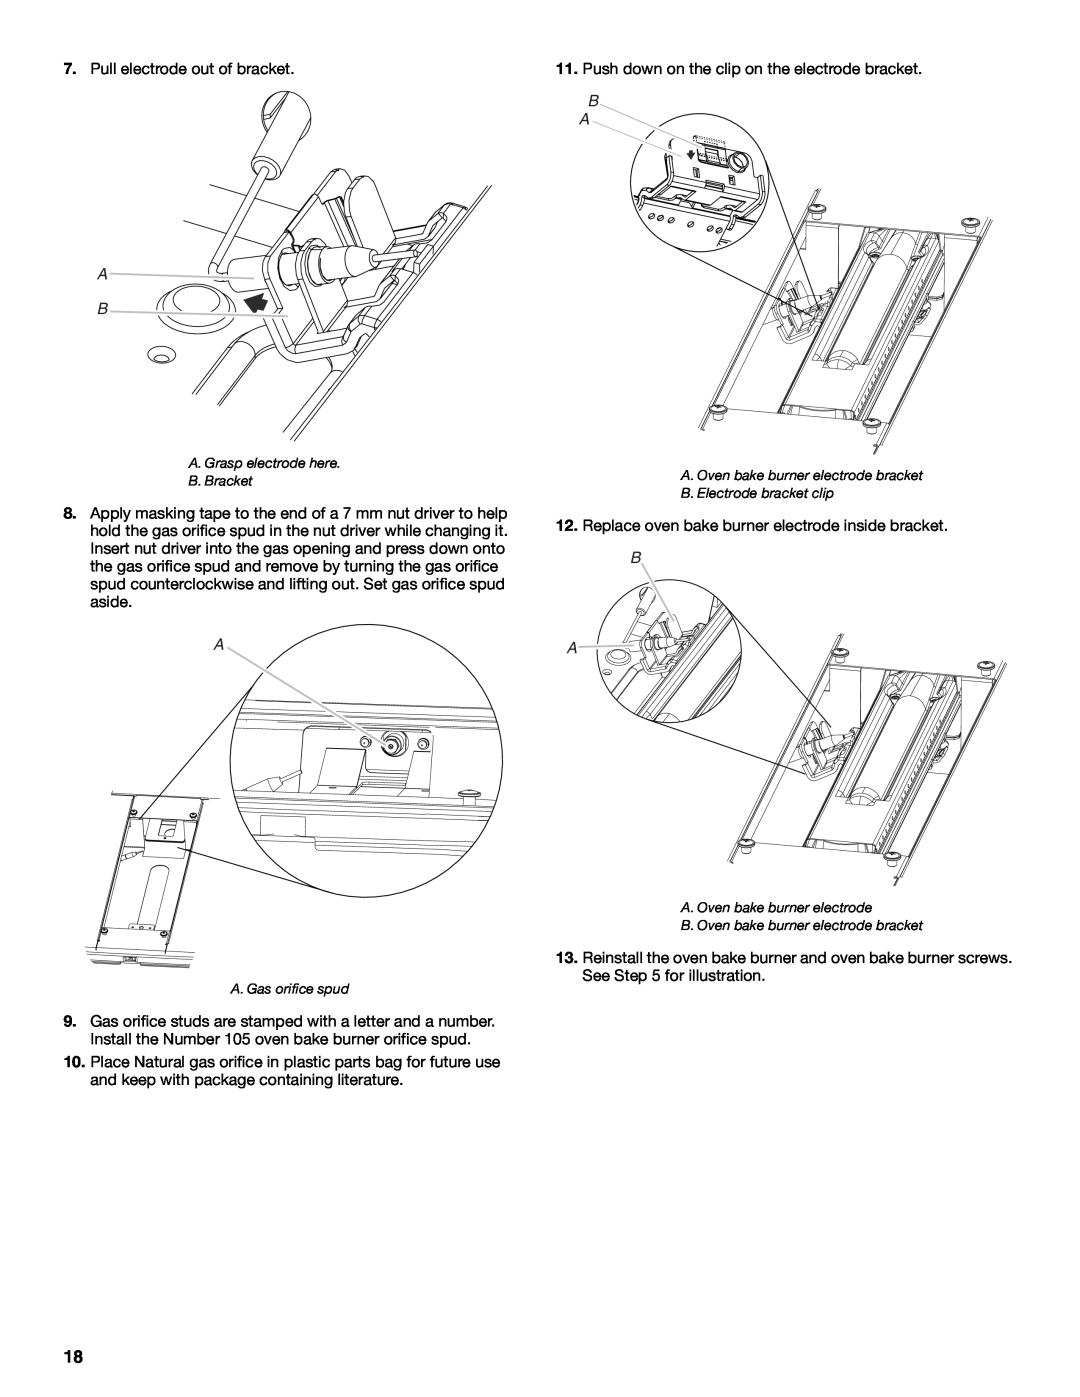 Jenn-Air W10394575A installation instructions Pull electrode out of bracket 